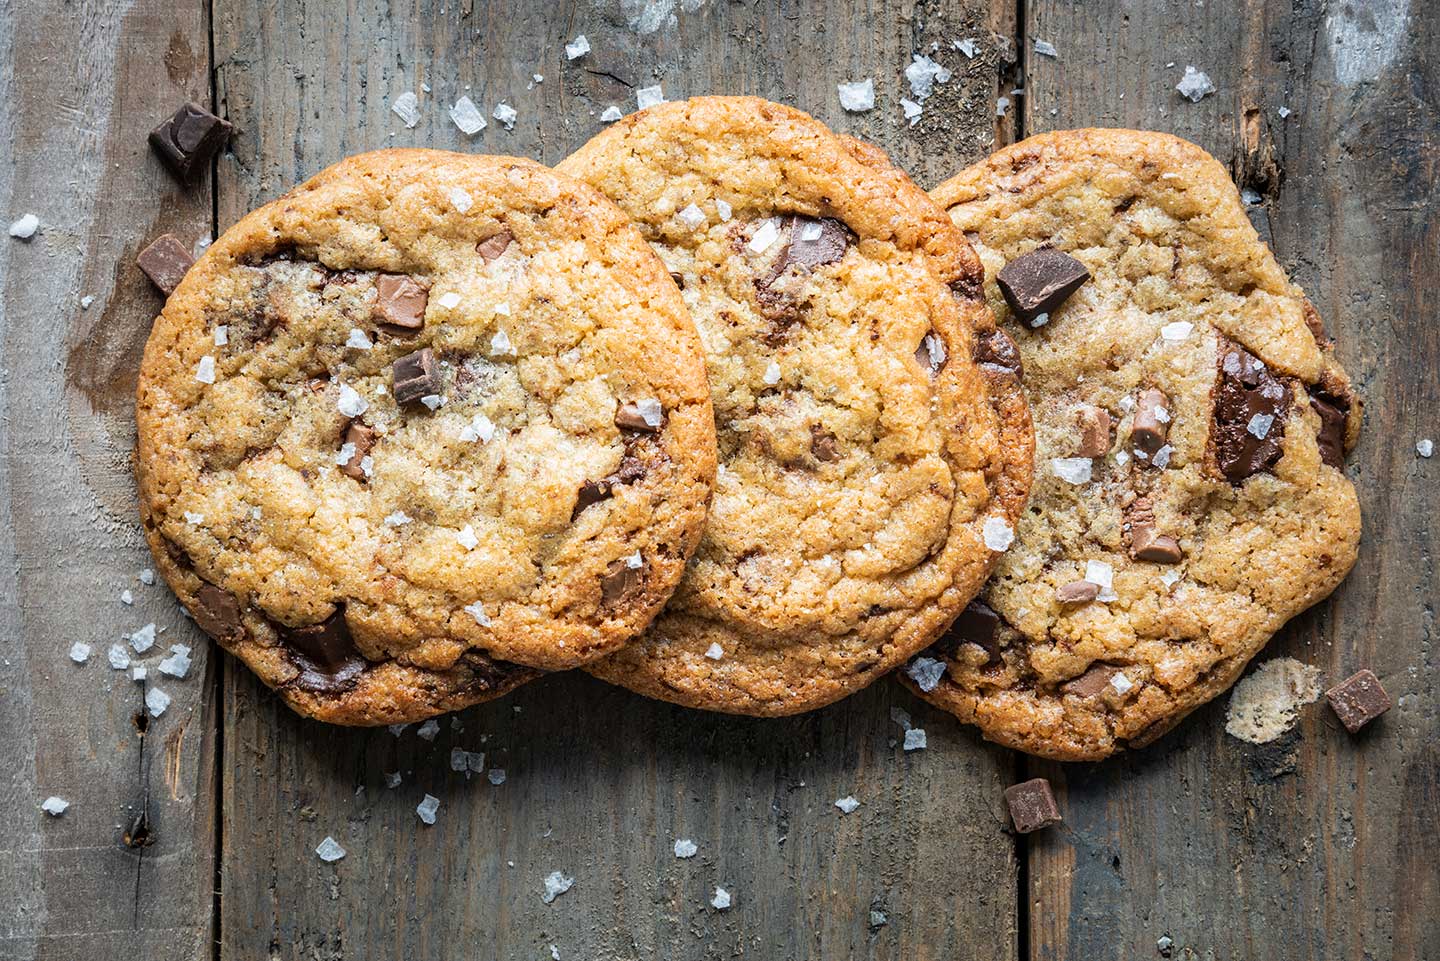 For High-Quality Baking, You Need the Best Chocolate Chips